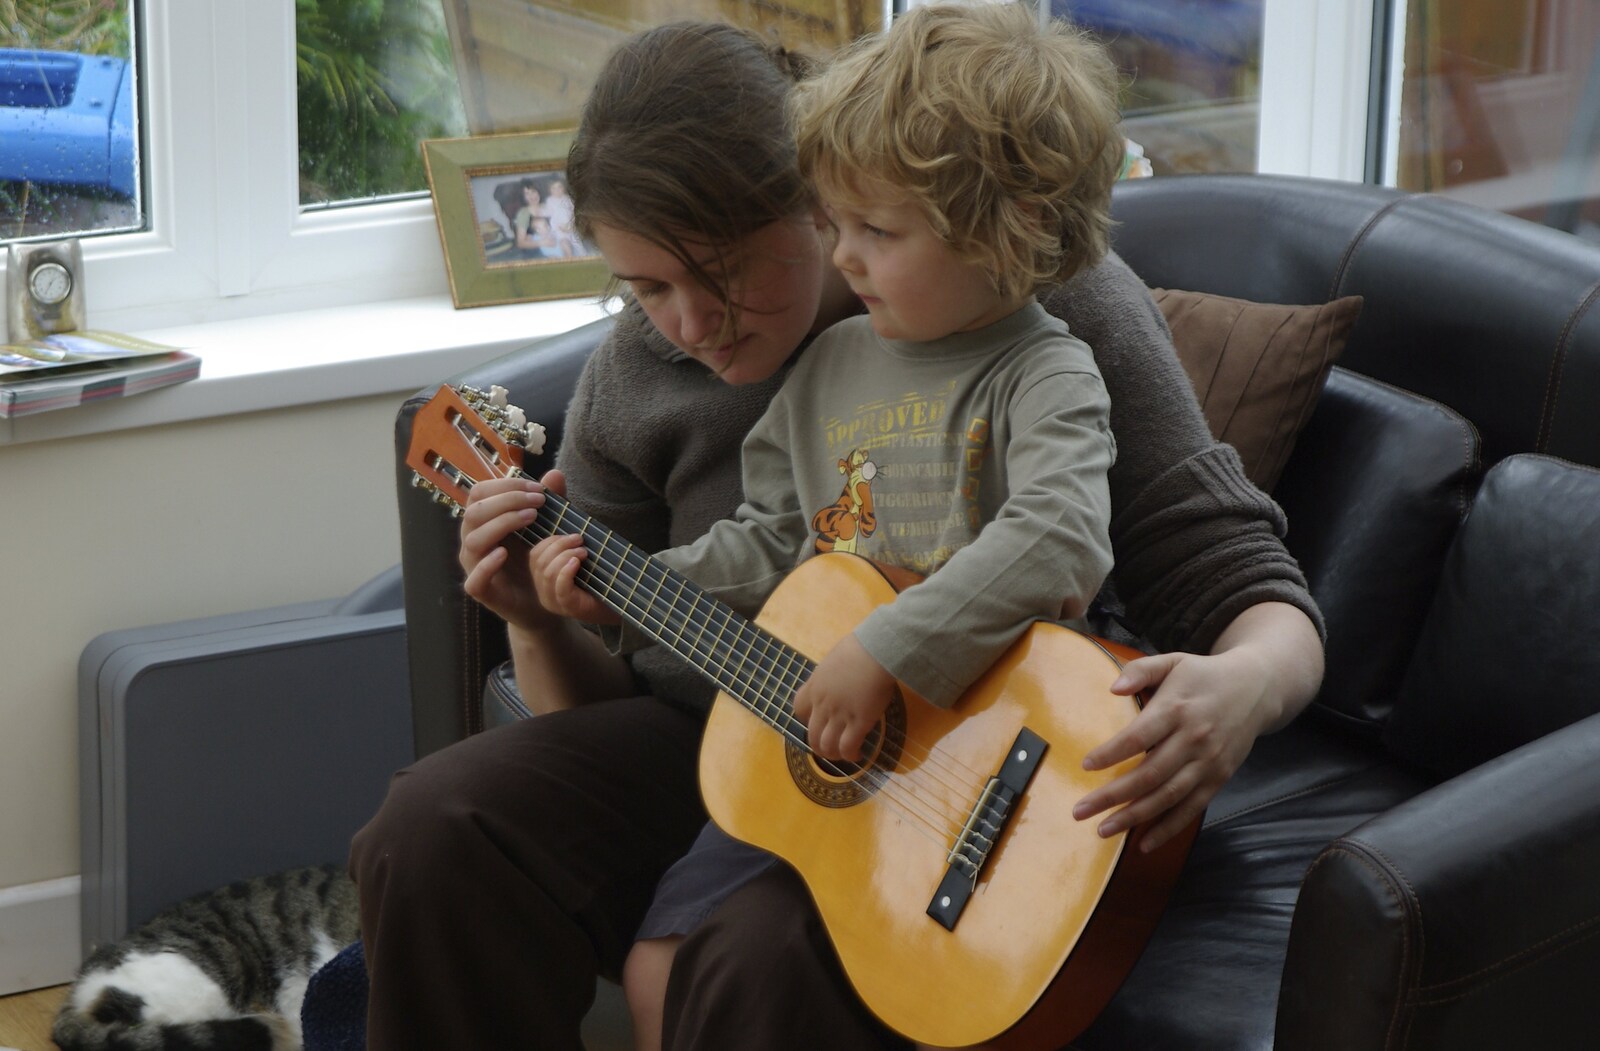 Nosher's Birthday Trip, New Milton, Hampshire - 26th May 2007: Isobel shows Rowan a few chords on the guitar